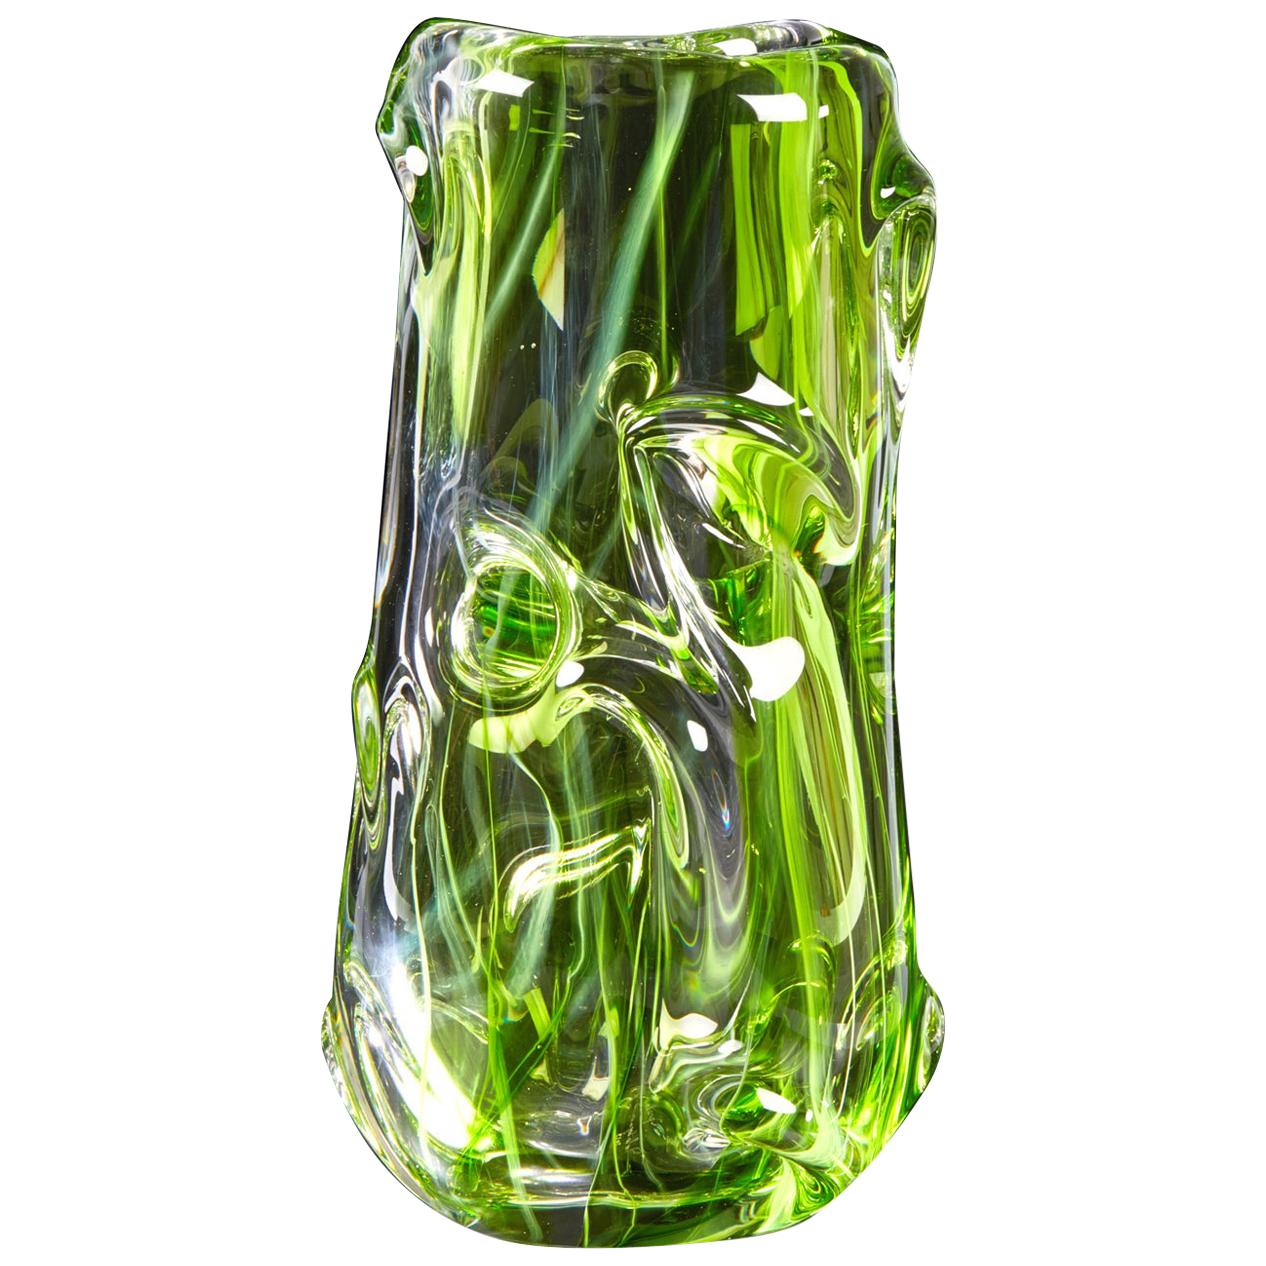 Giampaolo Seguso, "Surprise" Vase, One of a Kind Murano Glass Art Works For Sale